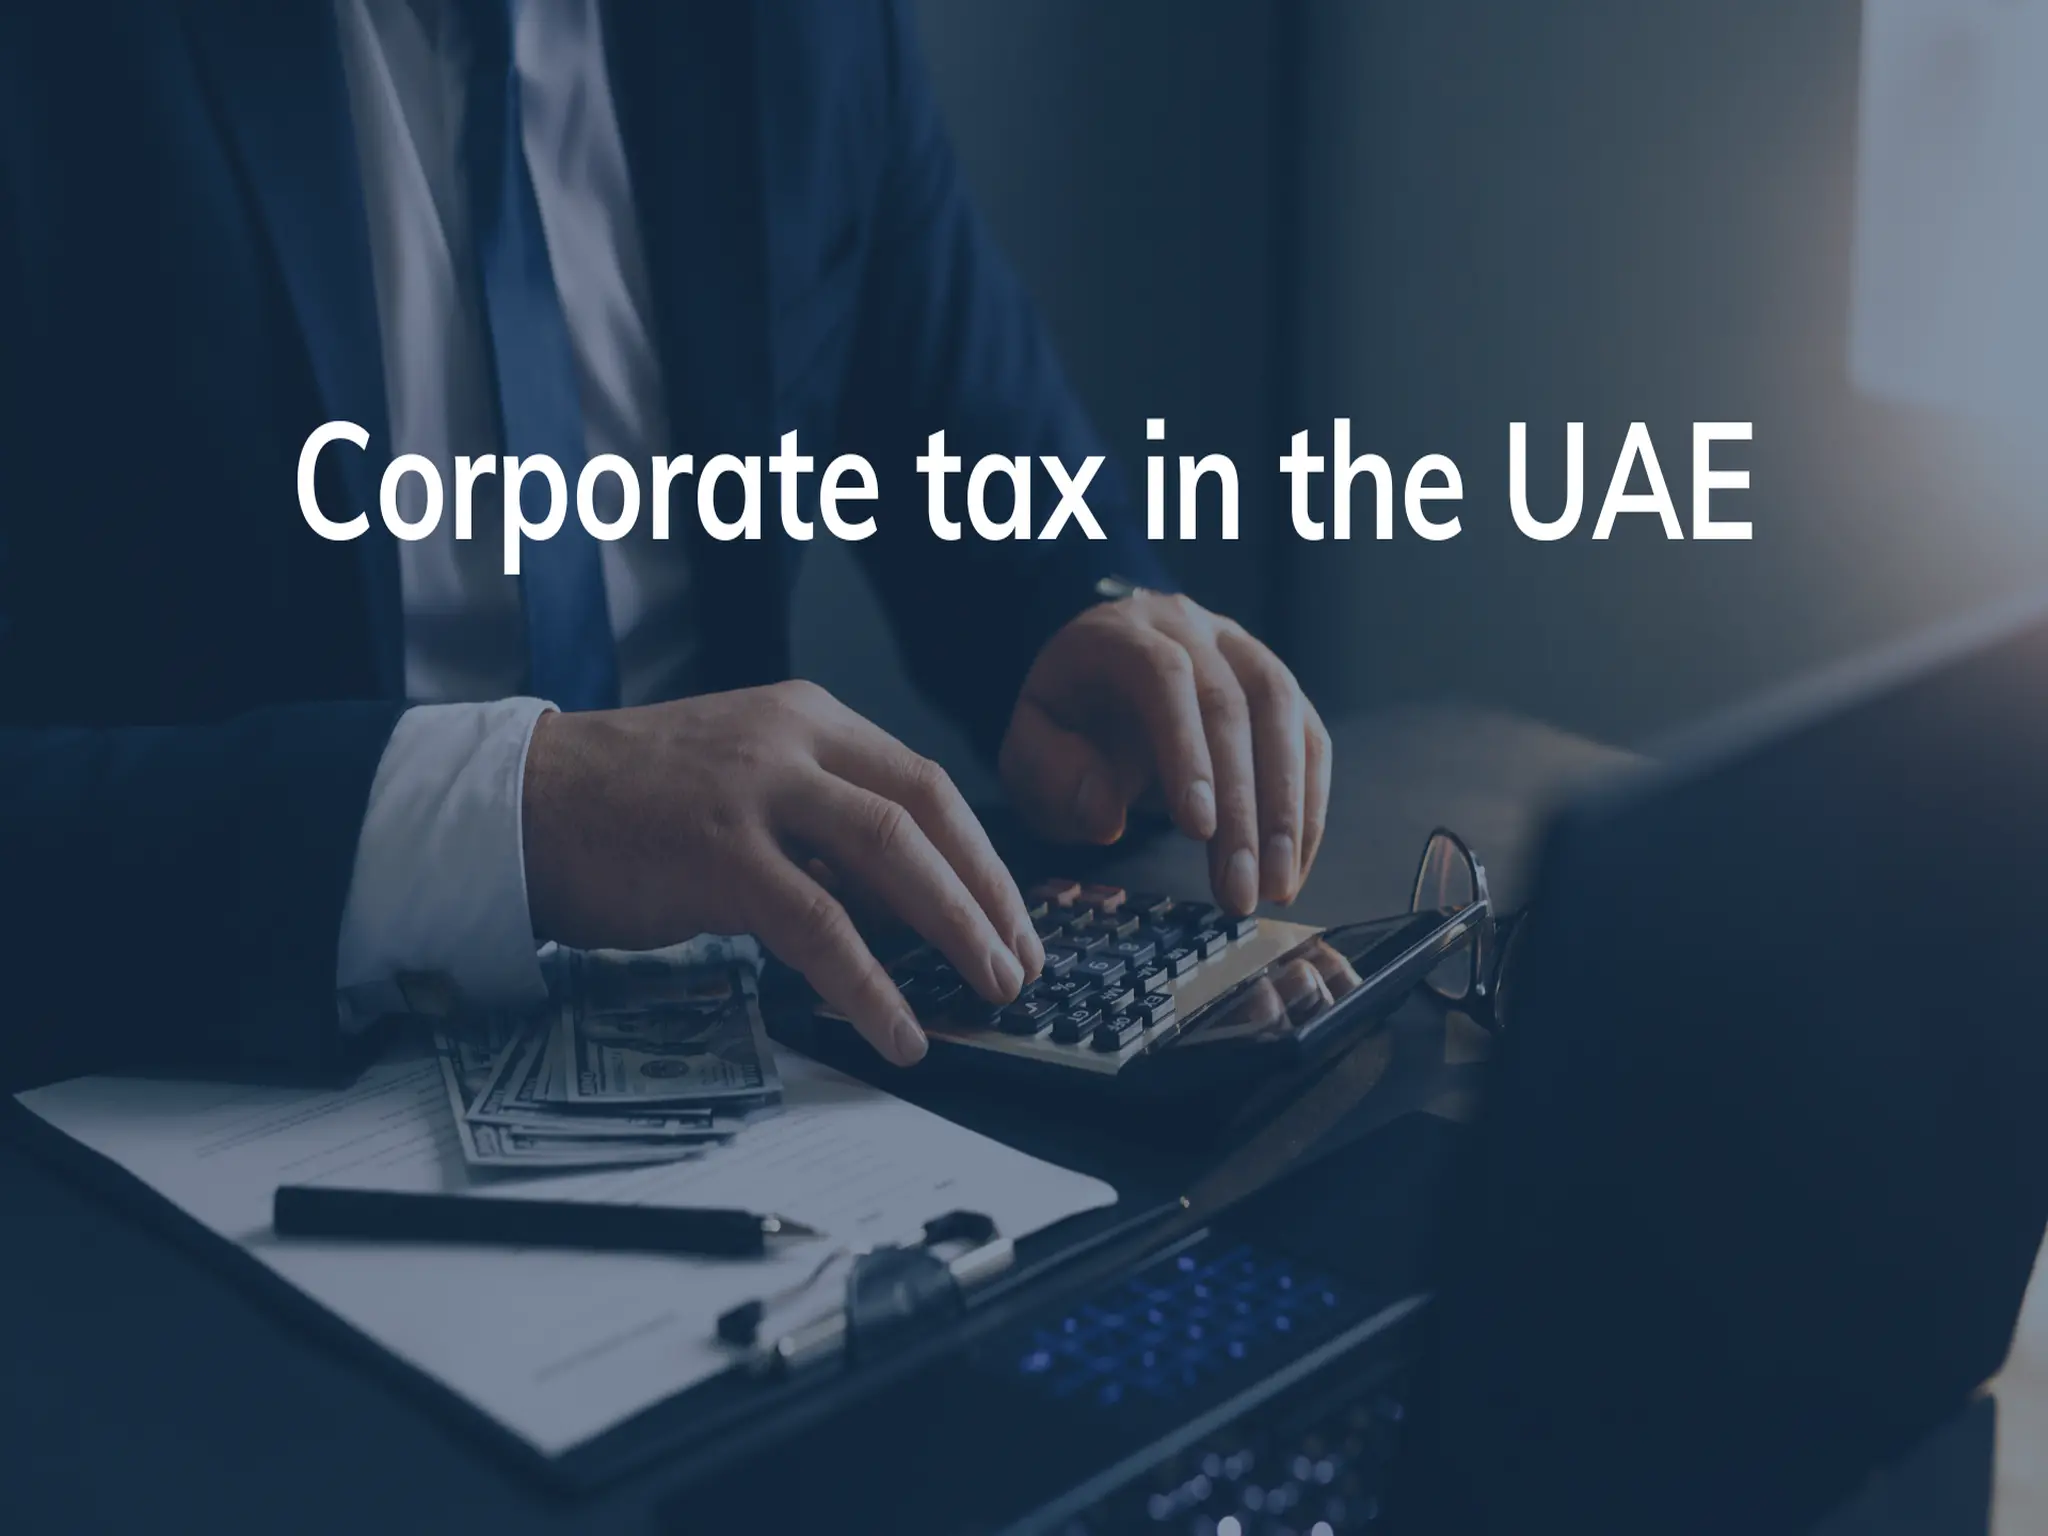 UAE Corporate Tax: Companies need to exercise caution with their "branch" licenses